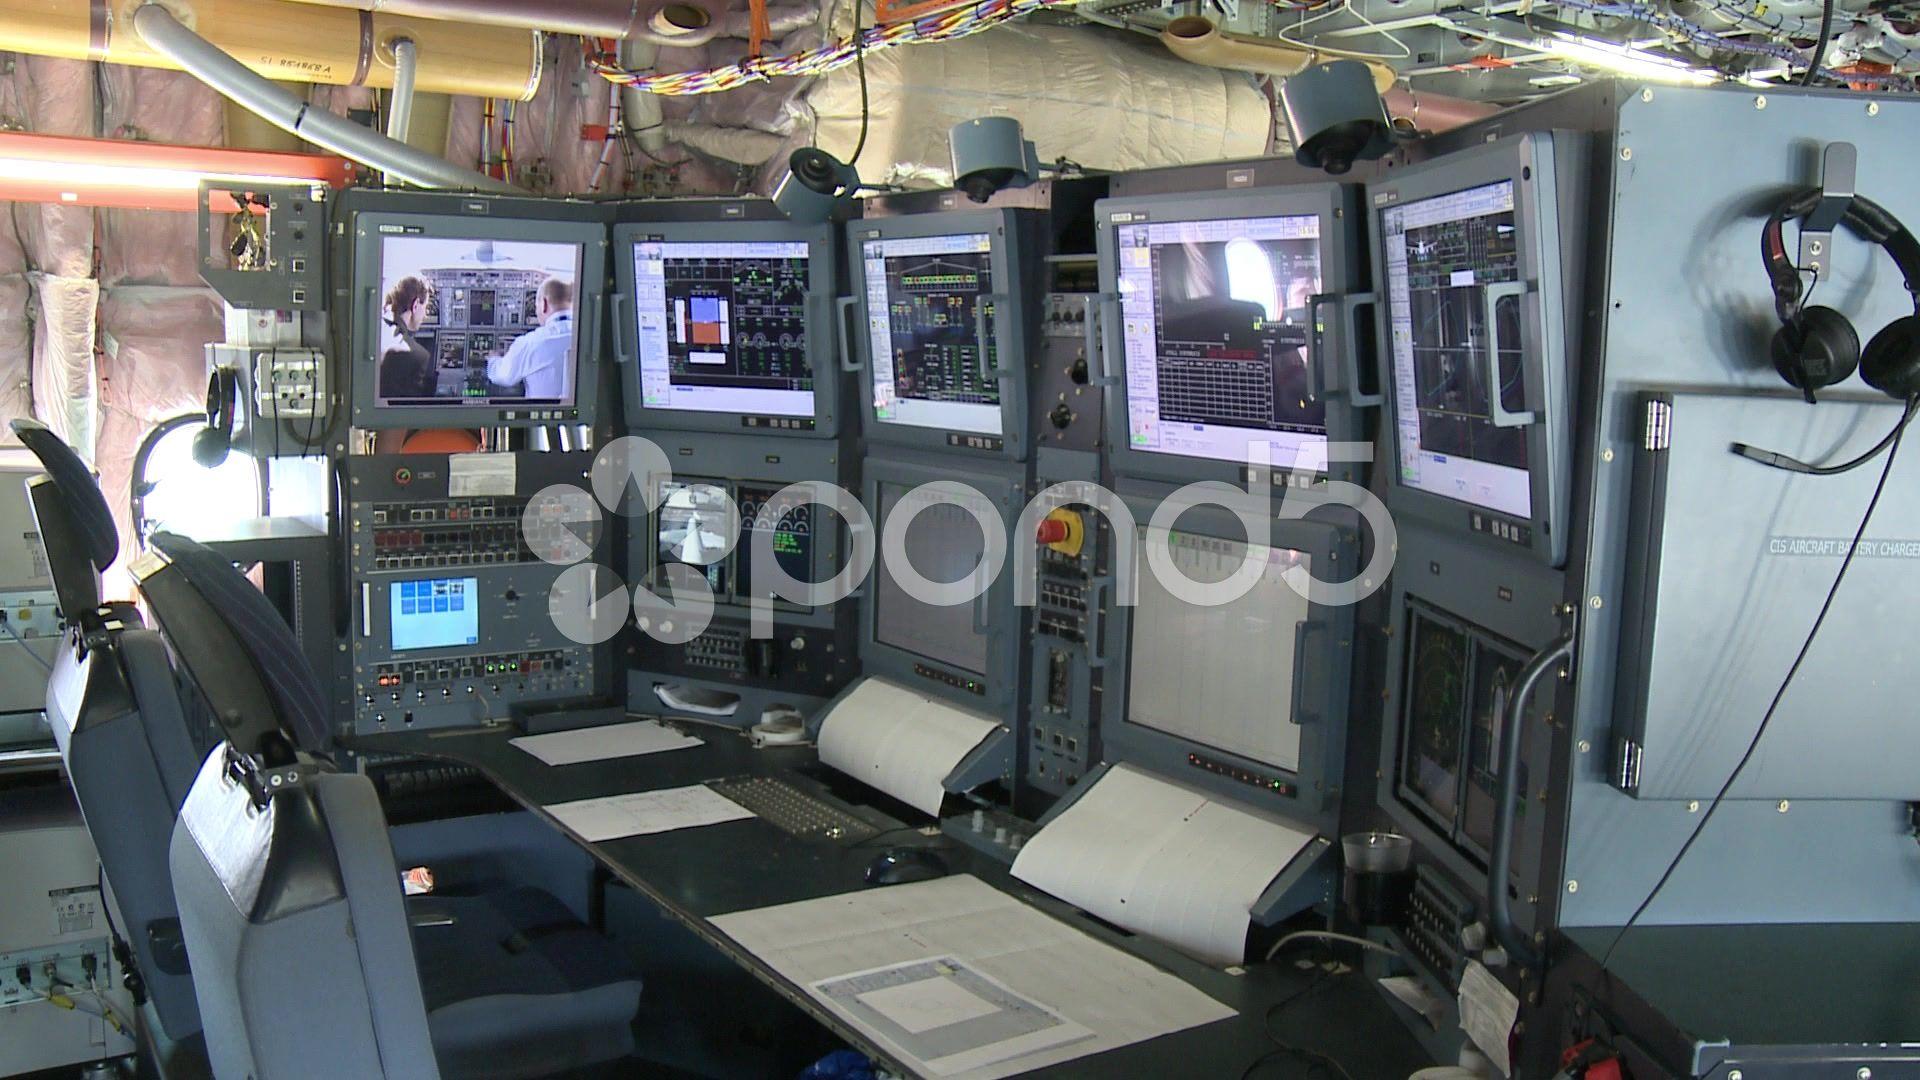 Engineers Workstation on board the Airbus A380 Test & Evaluation